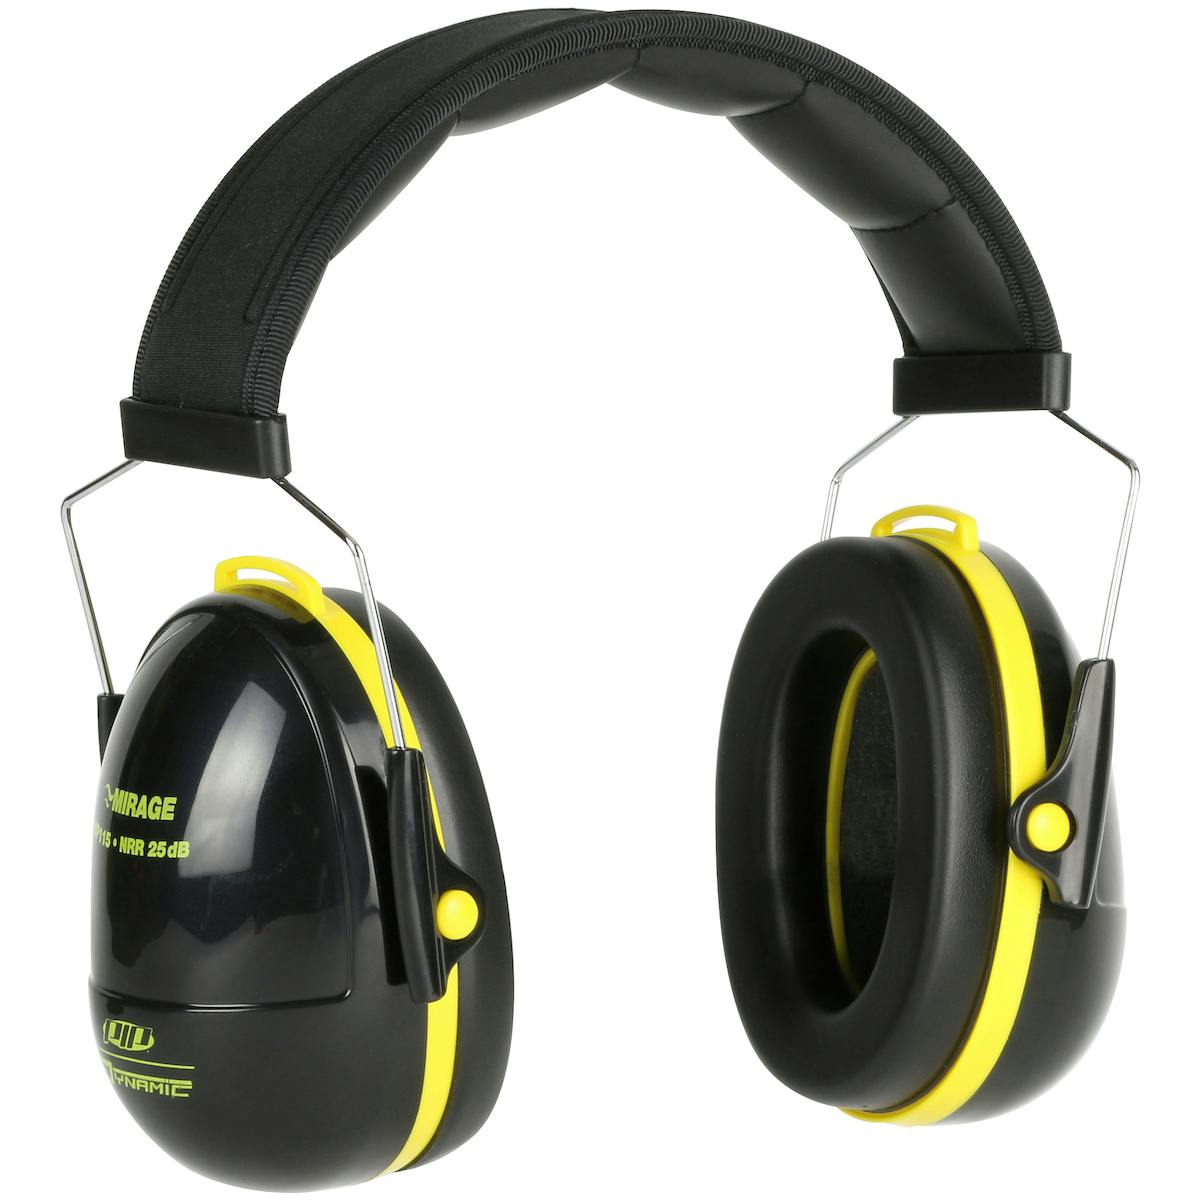 Passive Ear Muff with Adjustable Headband - NRR 25, Black (263-NP115) - OS